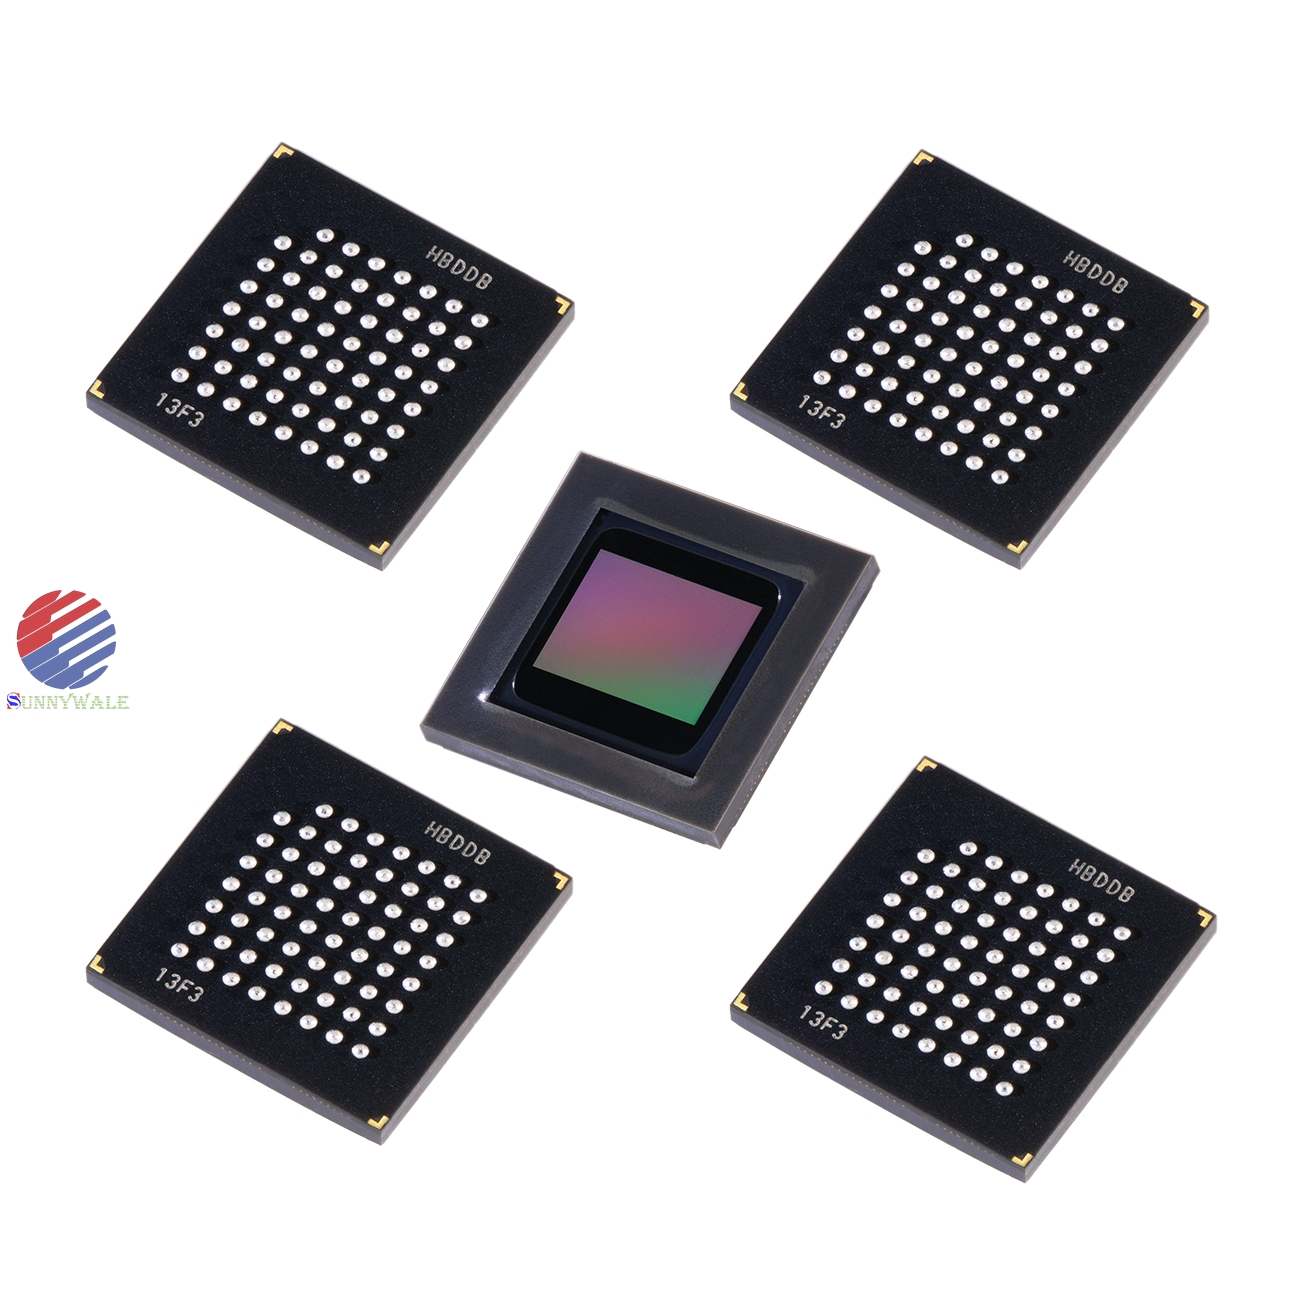 ASX342ATSC00XPED0, ONSEMI 1/4 inch VGA color CMOS, NTSC/PAL, CMOS with good low light effect, rear view and side view blind spot 360-degree panoramic camera chip, automotive image sensor, SOC and overlay processor, ASX340 upgraded productor, MT9V139 replacement